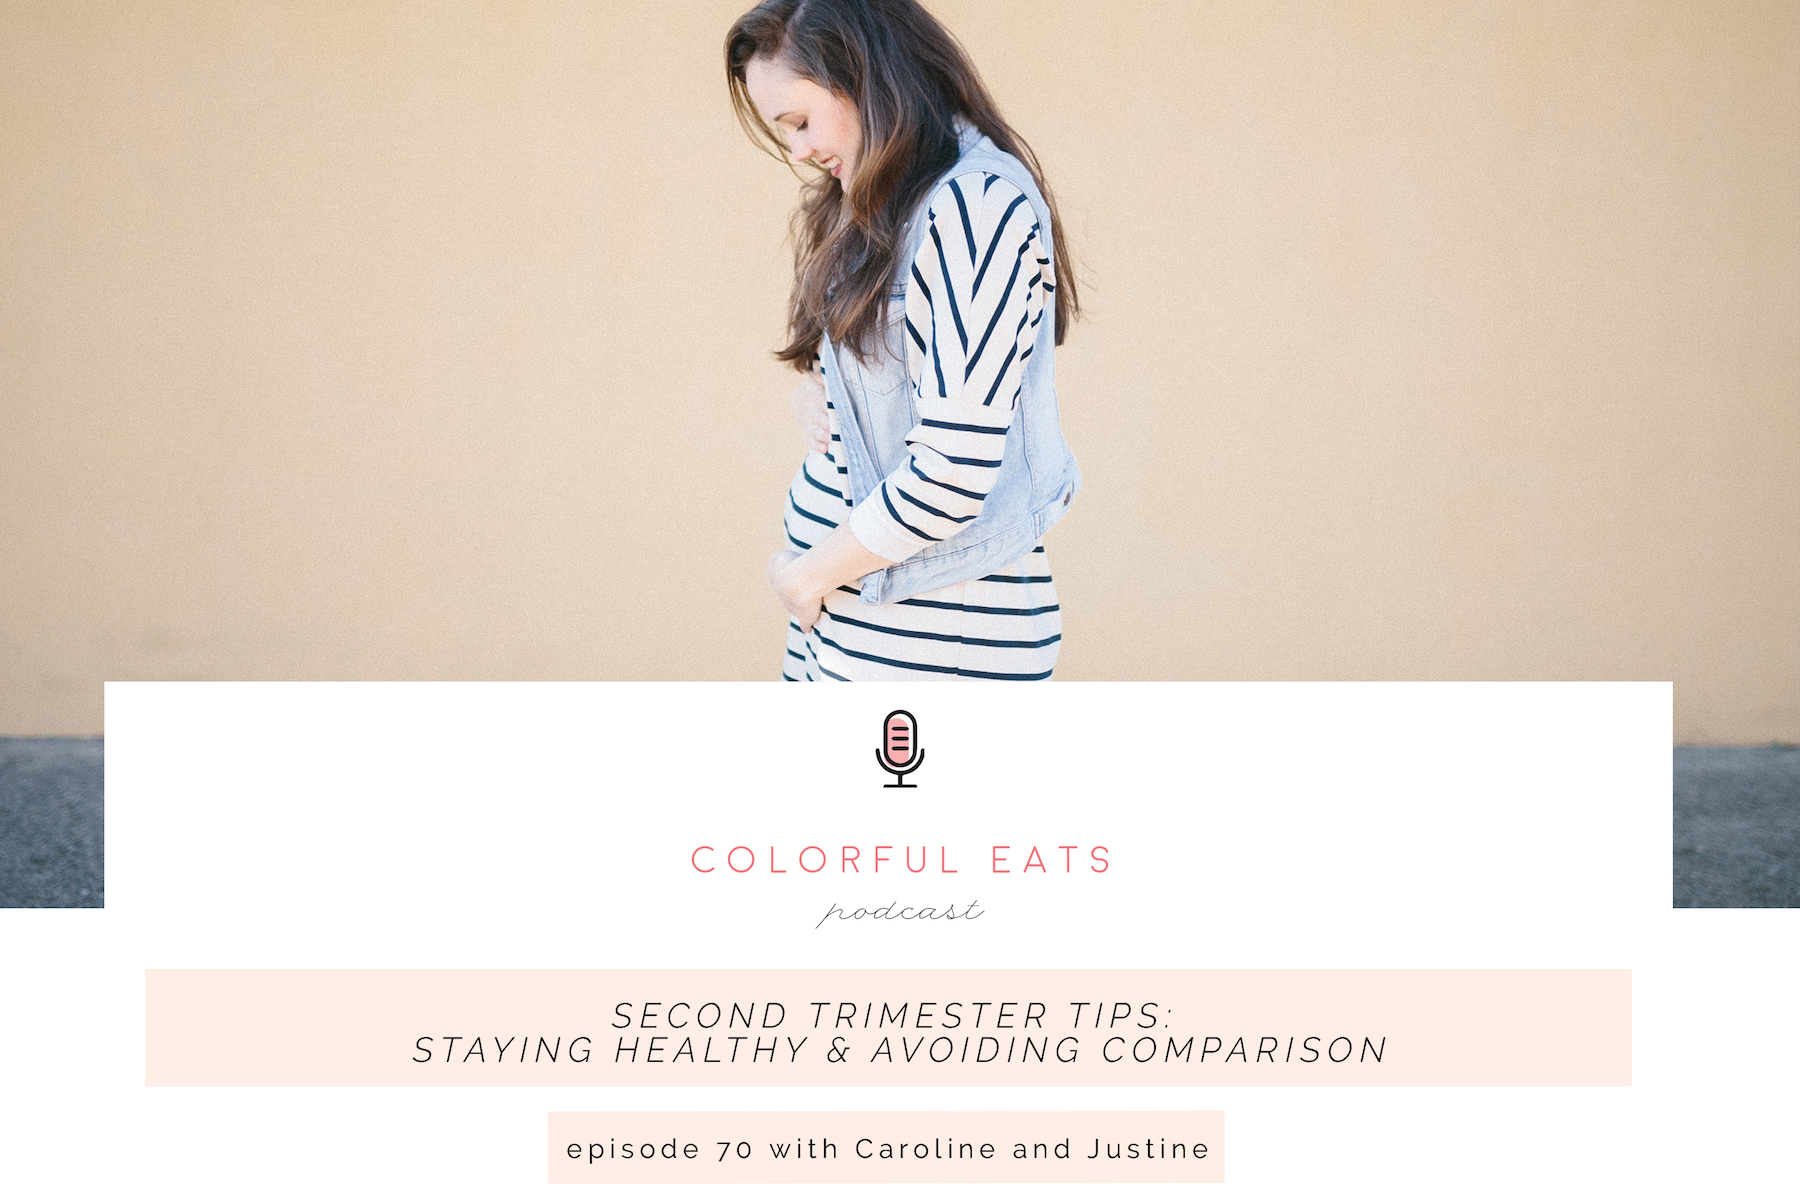 Episode 70: Second Trimester Tips: Staying Healthy & Avoiding Comparison